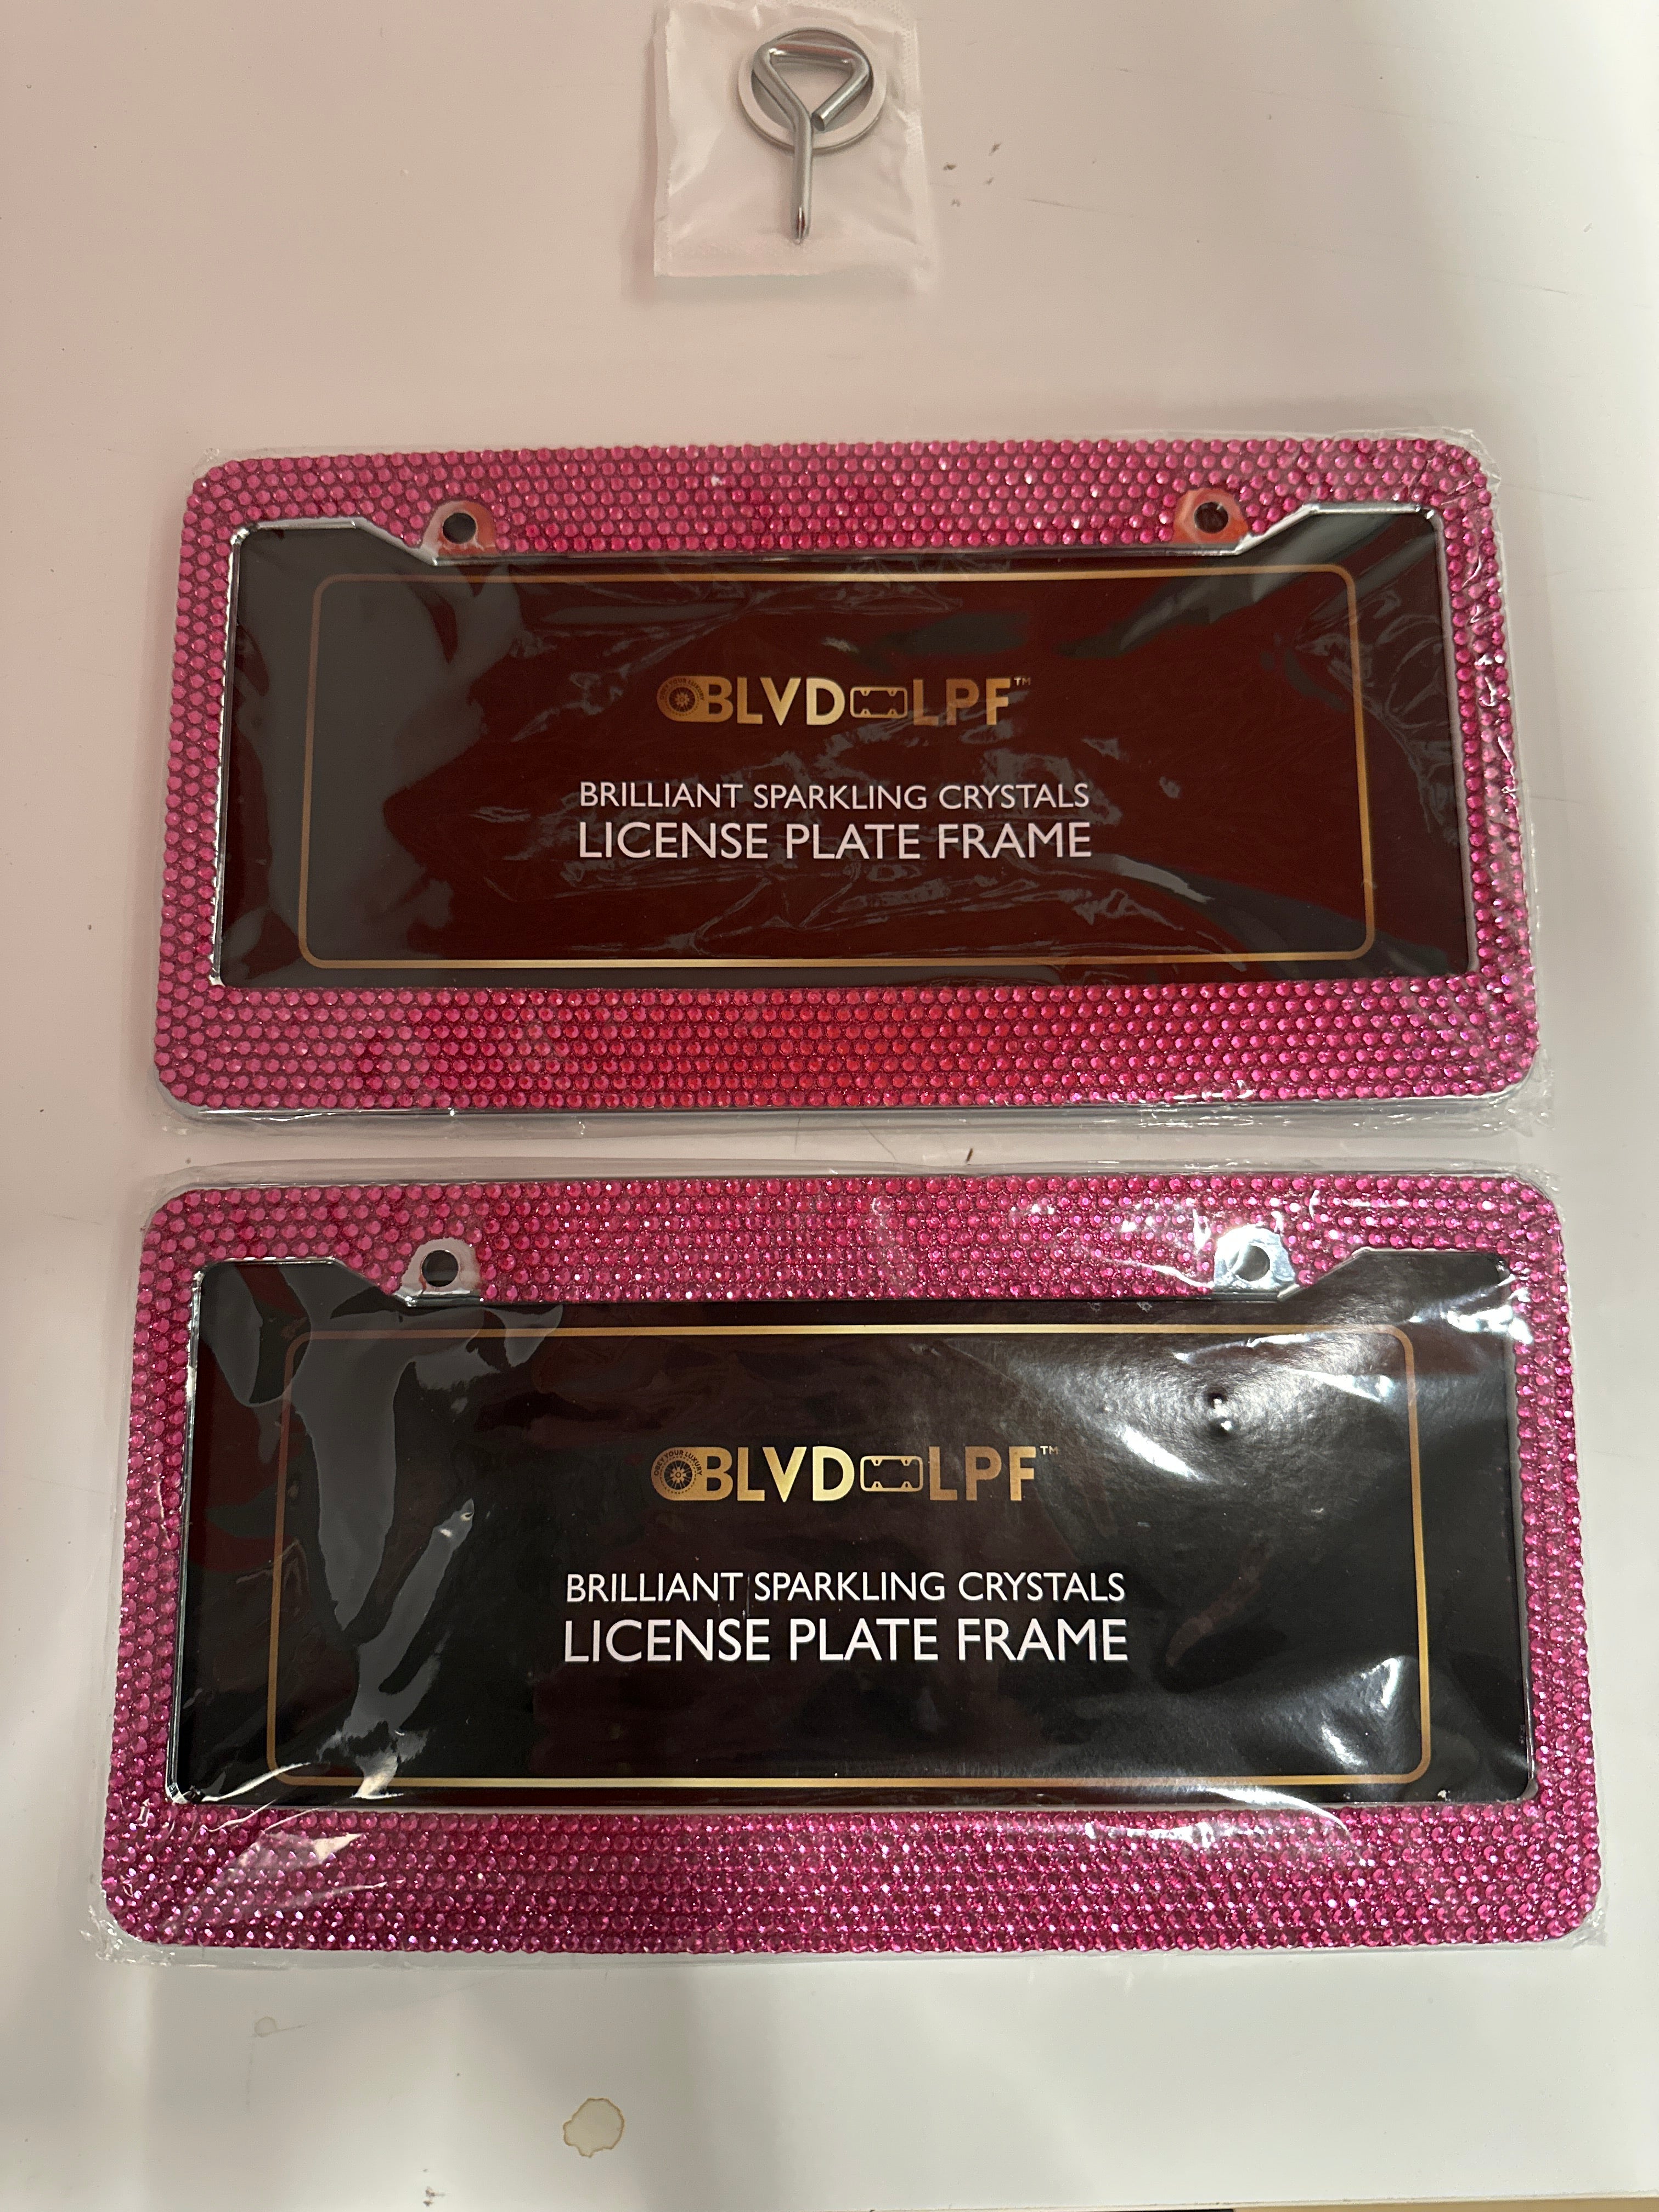 FIISFIIS Bling License Plate Frame for Women,2 Pack Premium Stainless Steel Rhinestone Car License Plate Holder,Handmade Glitter Crystal Diamond Lincense Plate Cover,Bedazzled Sparkly Caps-Pink - 100067